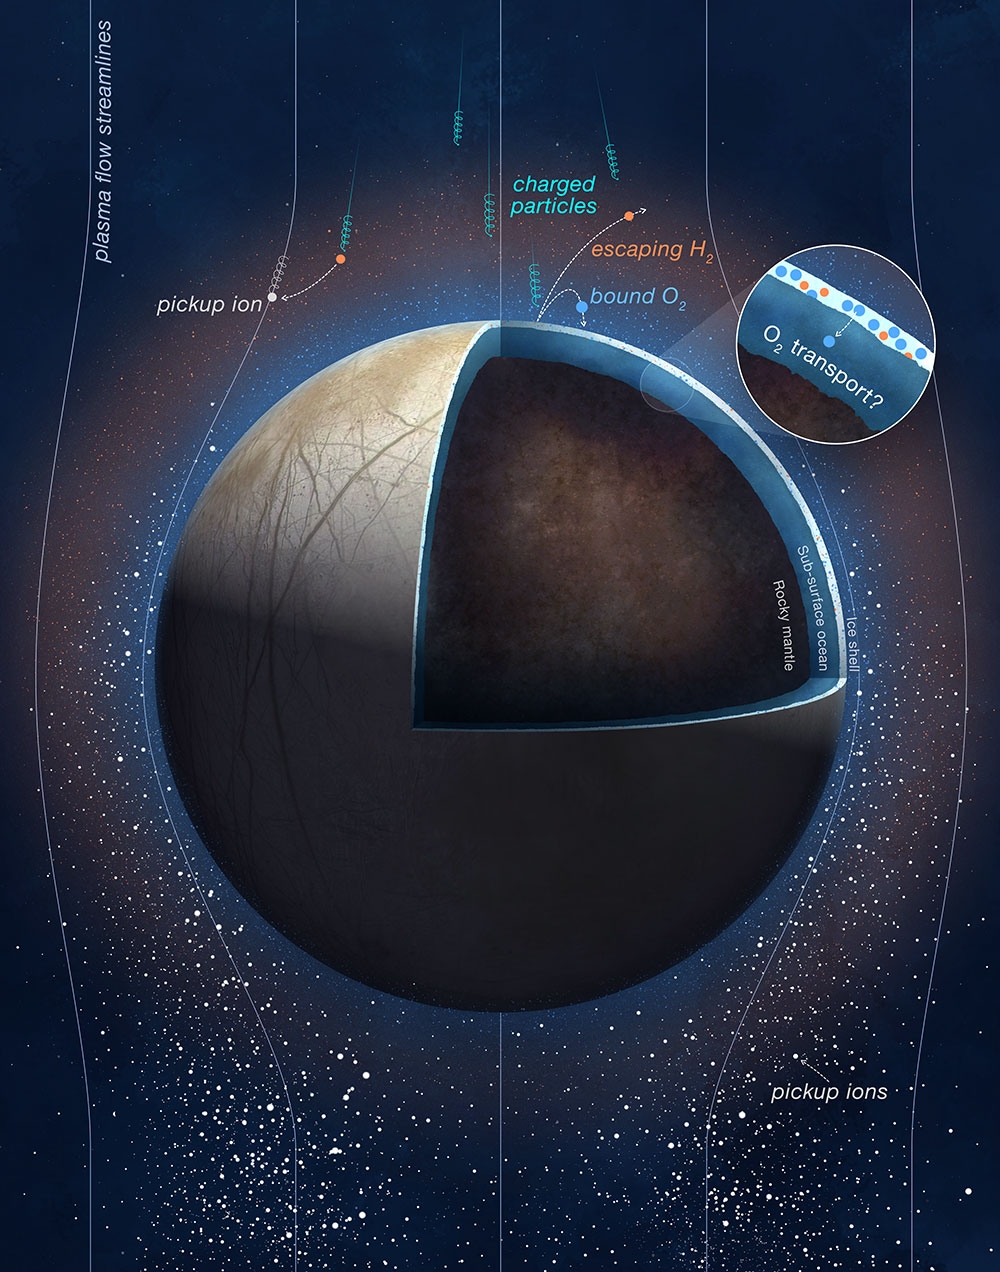 This illustration shows charged particles from Jupiter impacting Europa’s surface